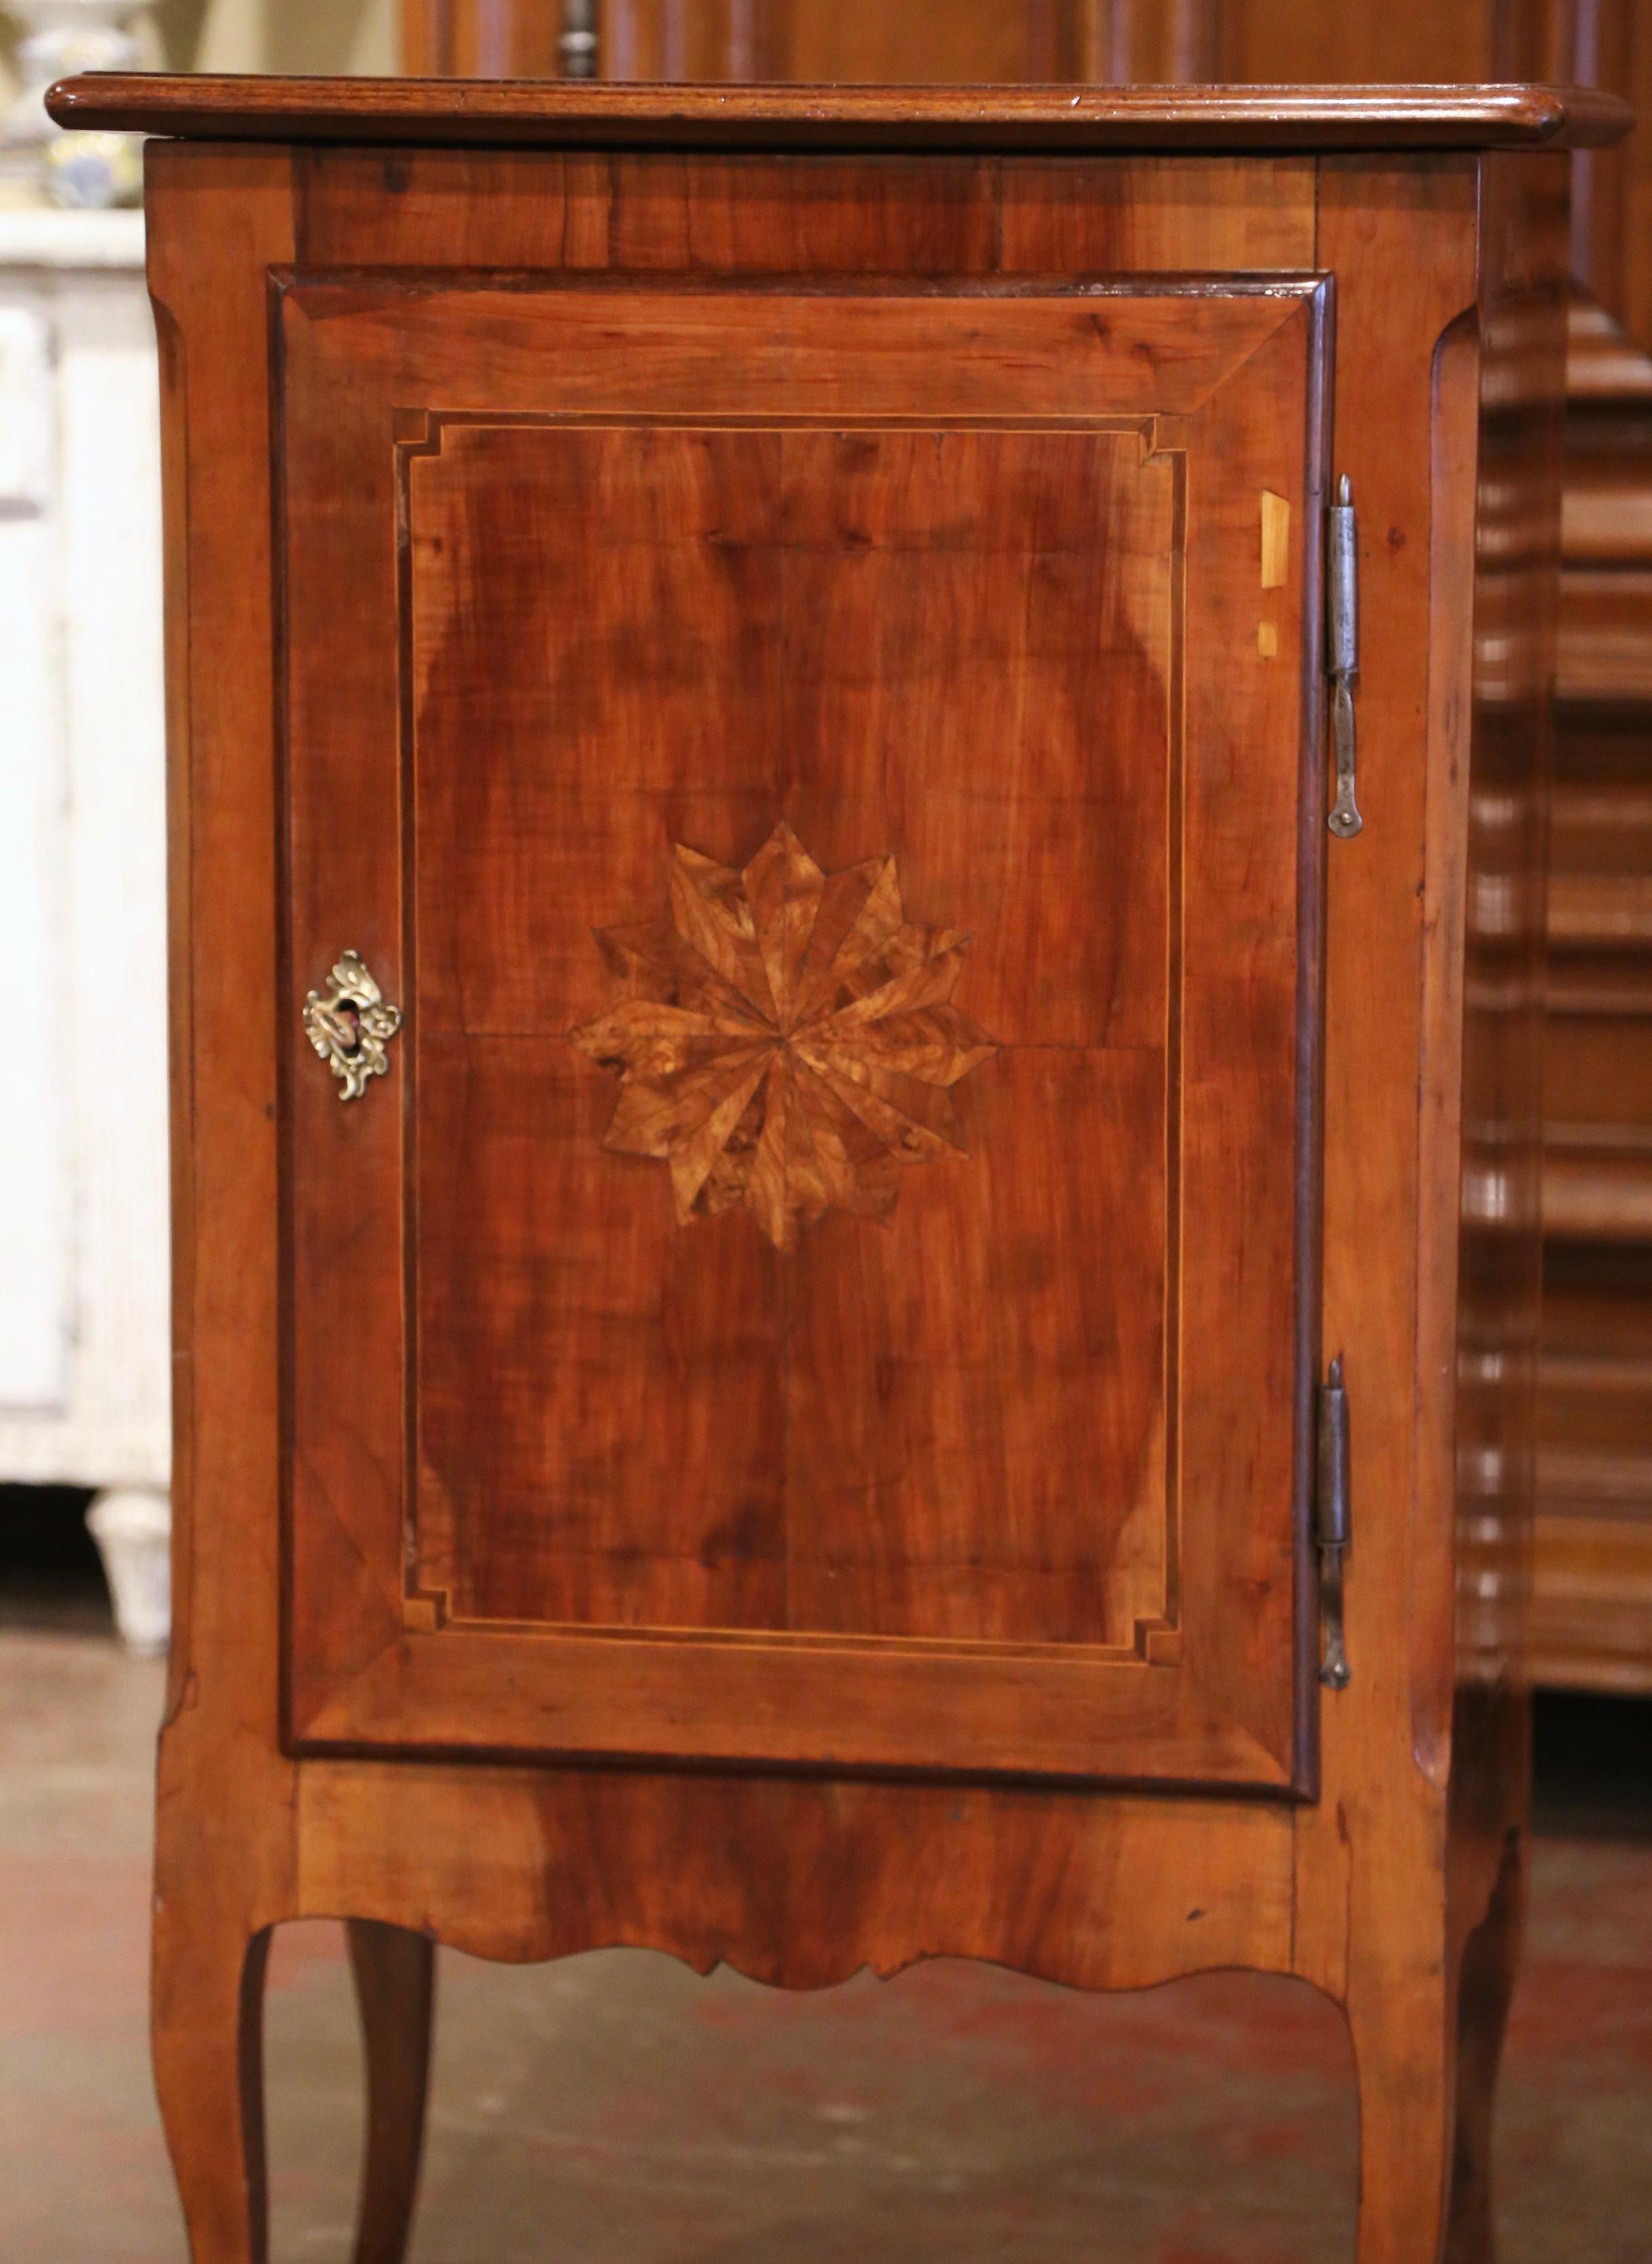 Crafted in Paris, France circa 1880, the antique cabinet stands on cabriole legs ending with bronze sabots over a scalloped apron. The rectangular top with inlaid motifs sits over a single door decorated with contrasting string inlay, and further